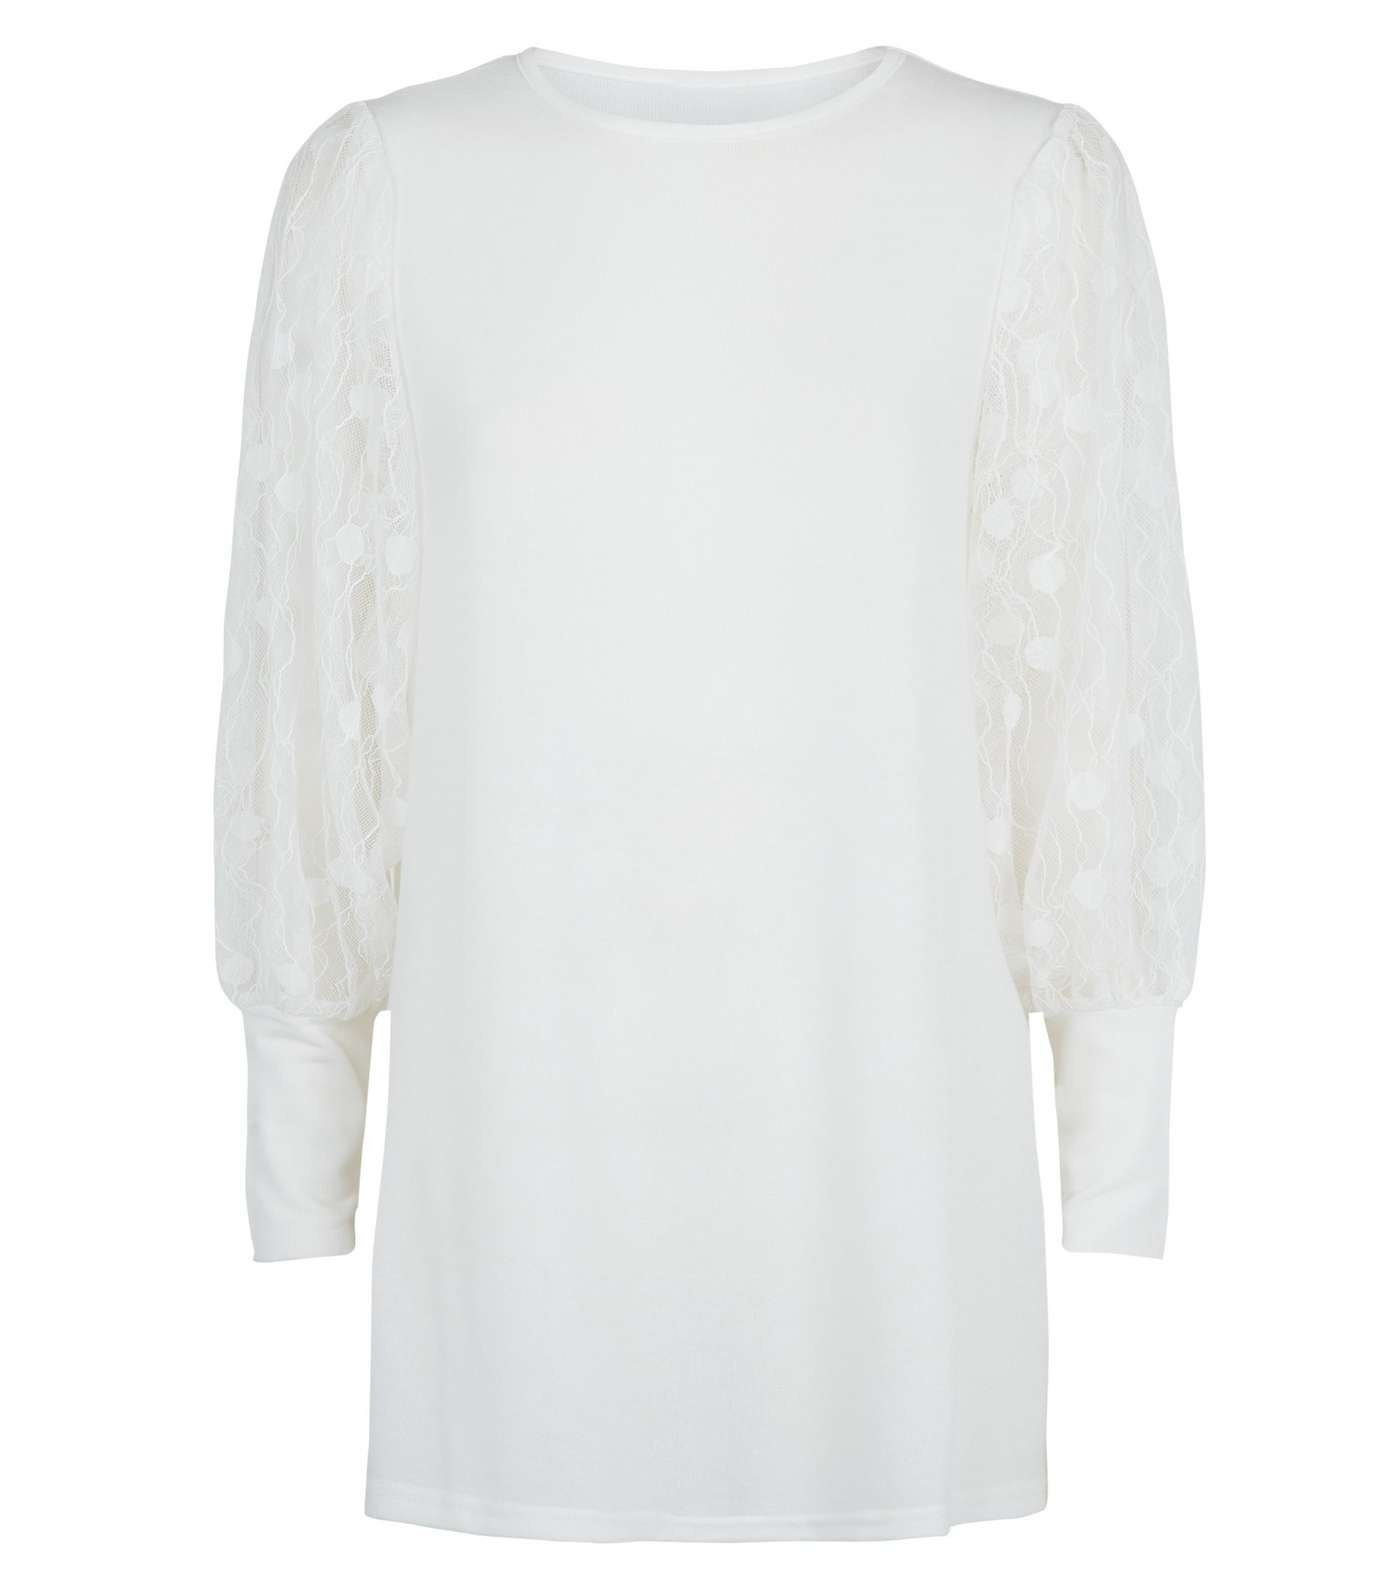 Blue Vanilla Off White Lace Sleeve Top Image 4